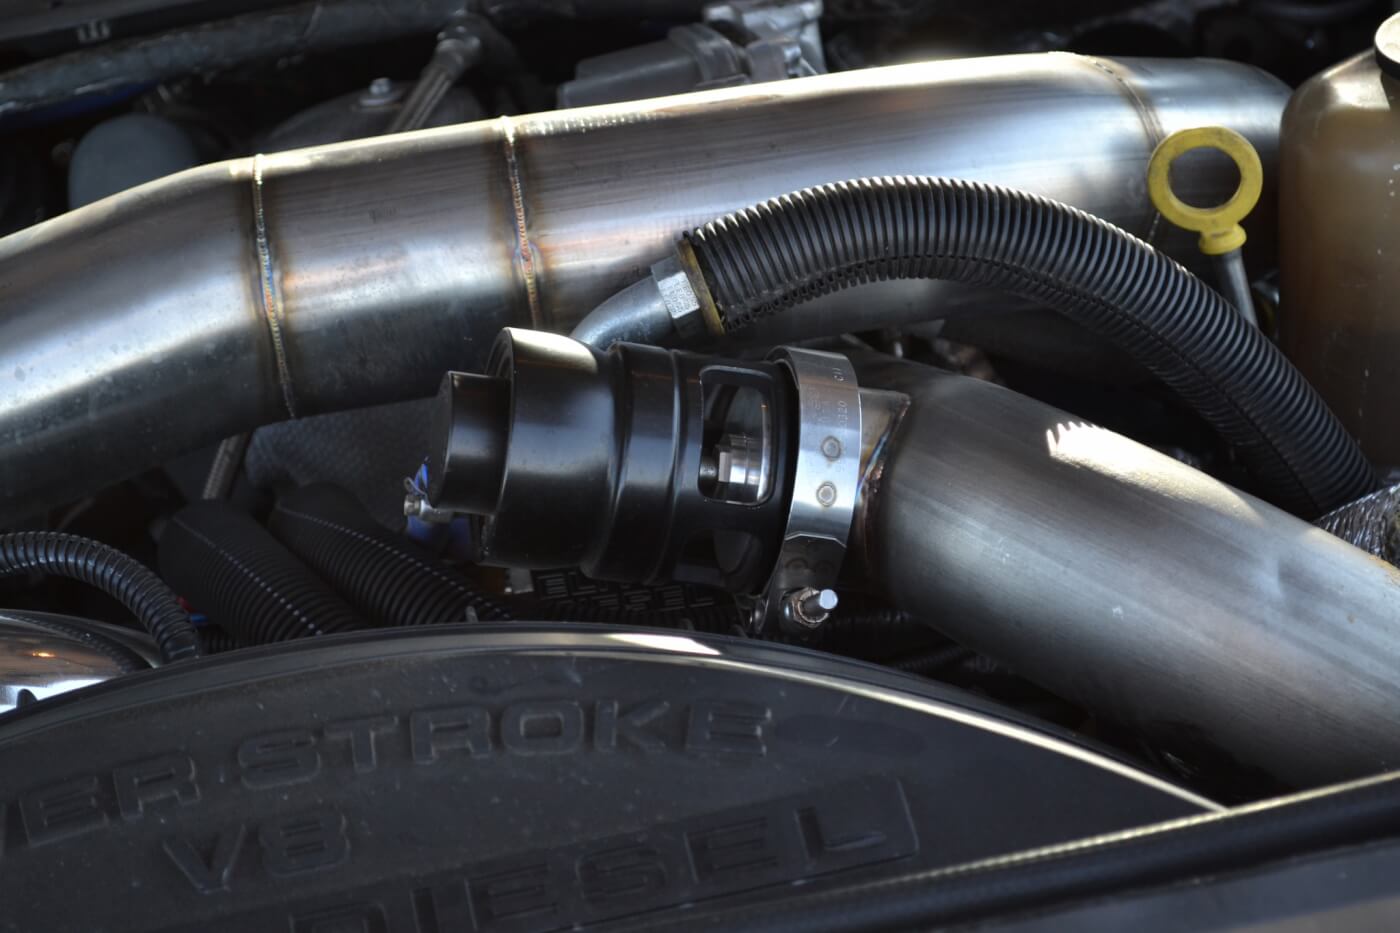 Chopping off the throttle quickly can create pressure spikes in the intake tract, so a blow-off valve was installed in the intake piping to keep compressor surge virtually nonexistent.